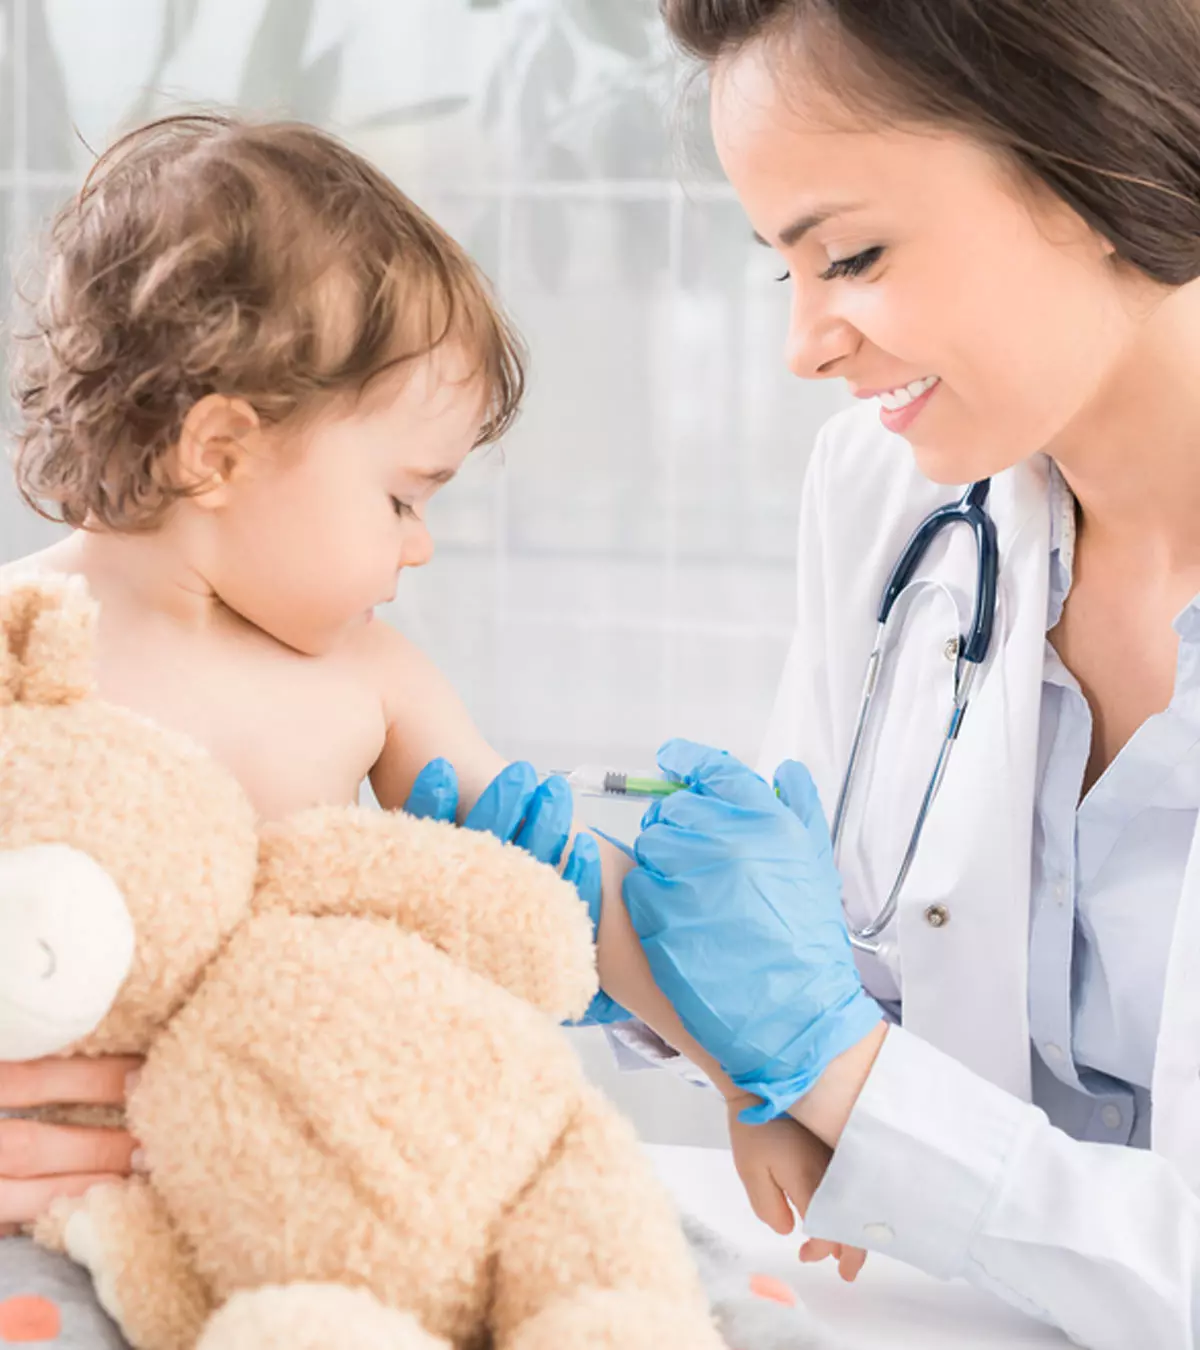 Painful Vs Painless Vaccination For Babies: Which Is Better?